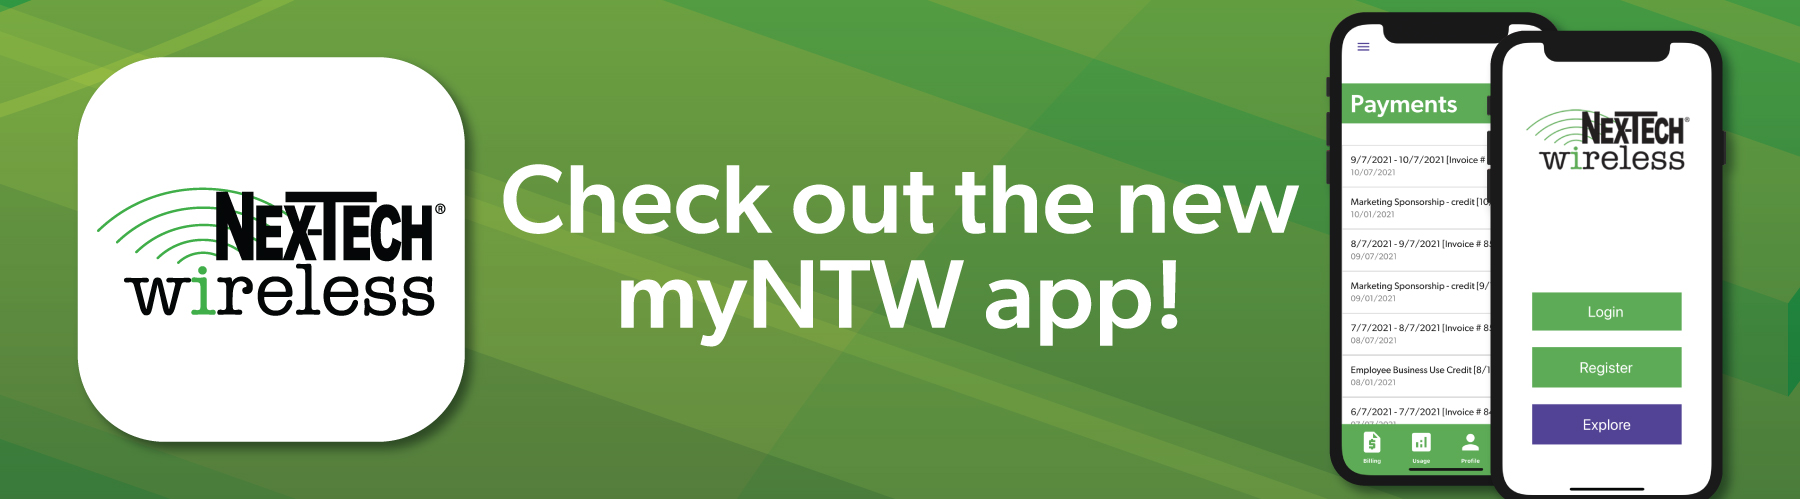 Check out the new myNTW app